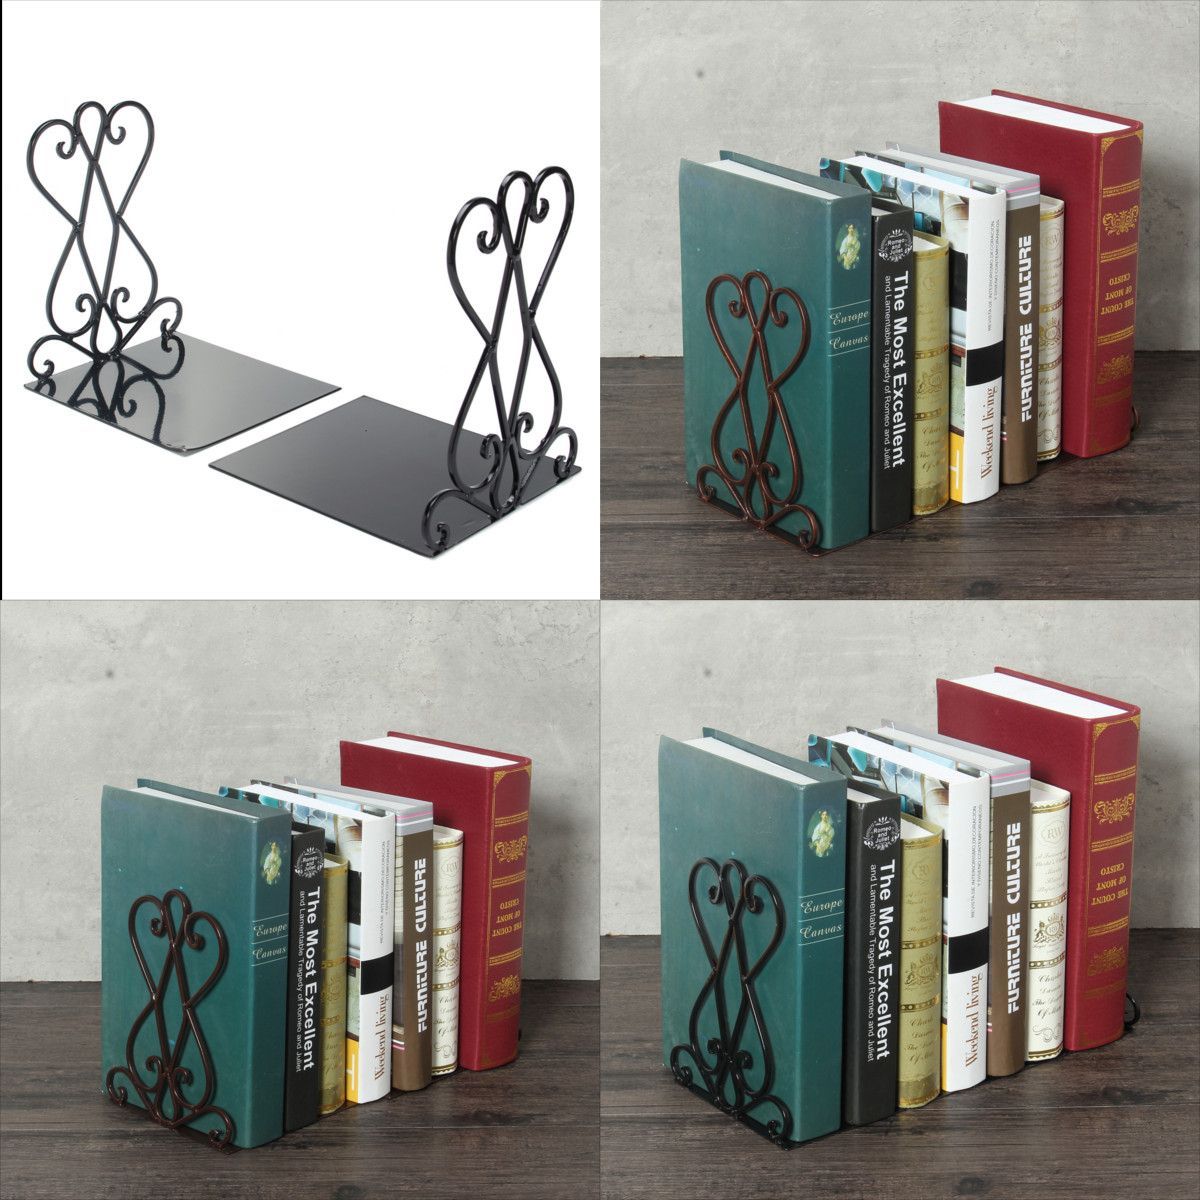 2Pcs-Vintage-Iron-Bookends-Shelf-Craft-Stand-Antique-Book-End-Home-Room-Decor-Ornaments-1383597